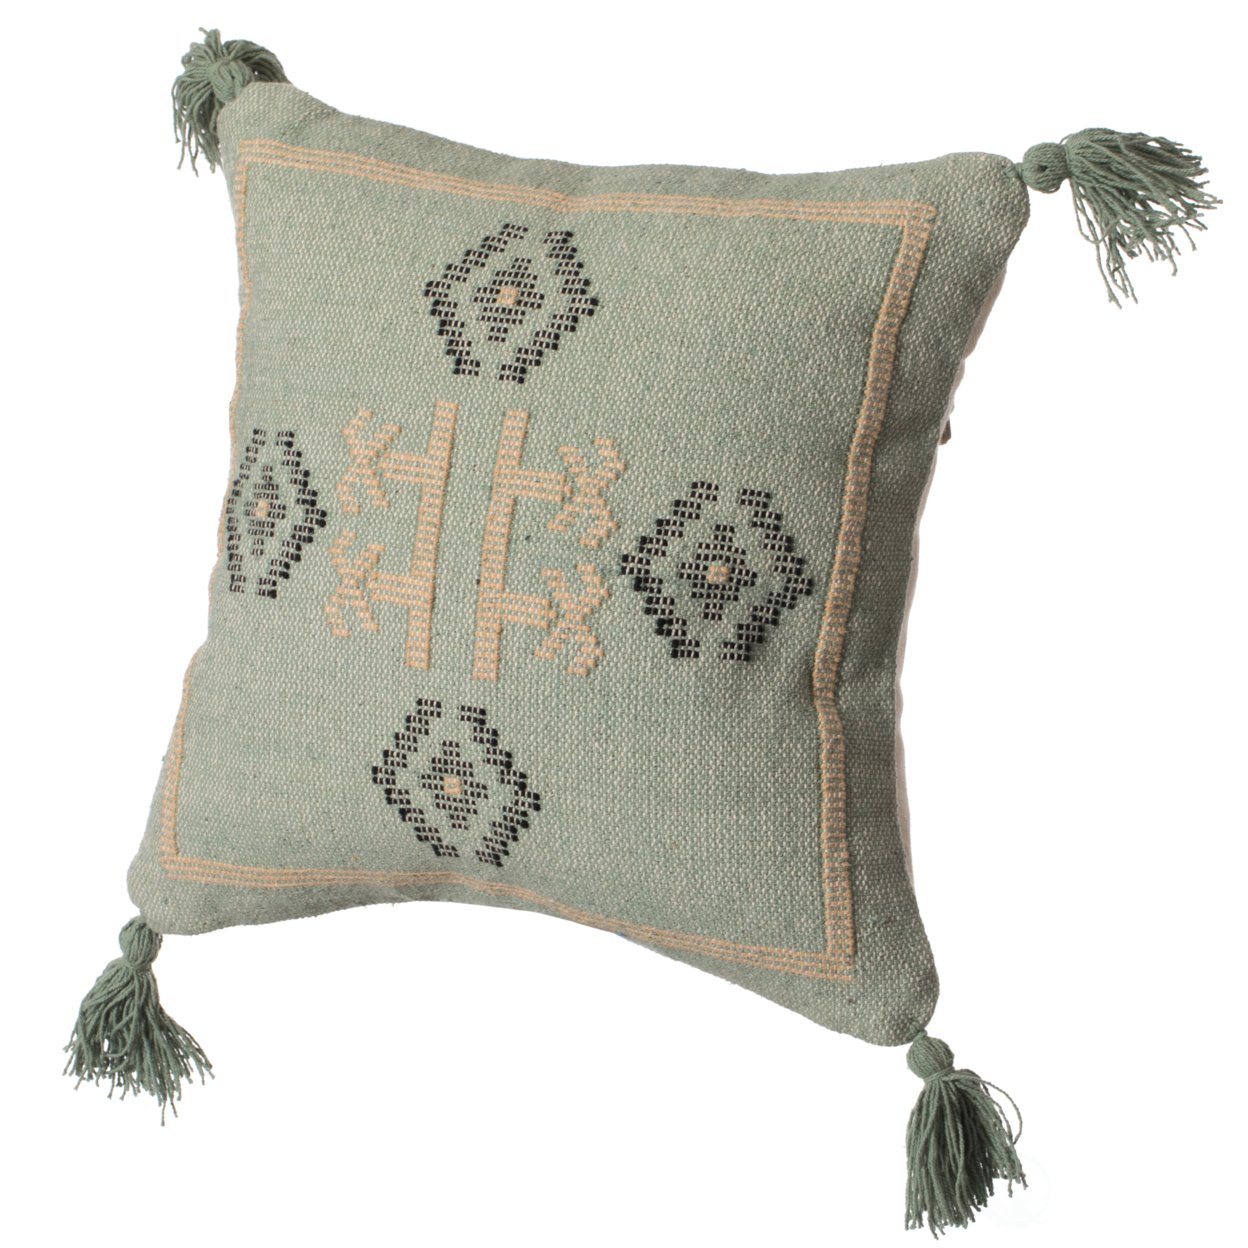 16" Handwoven Cotton Throw Pillow Cover with Tribal Aztec Design and Tassel Corners - green